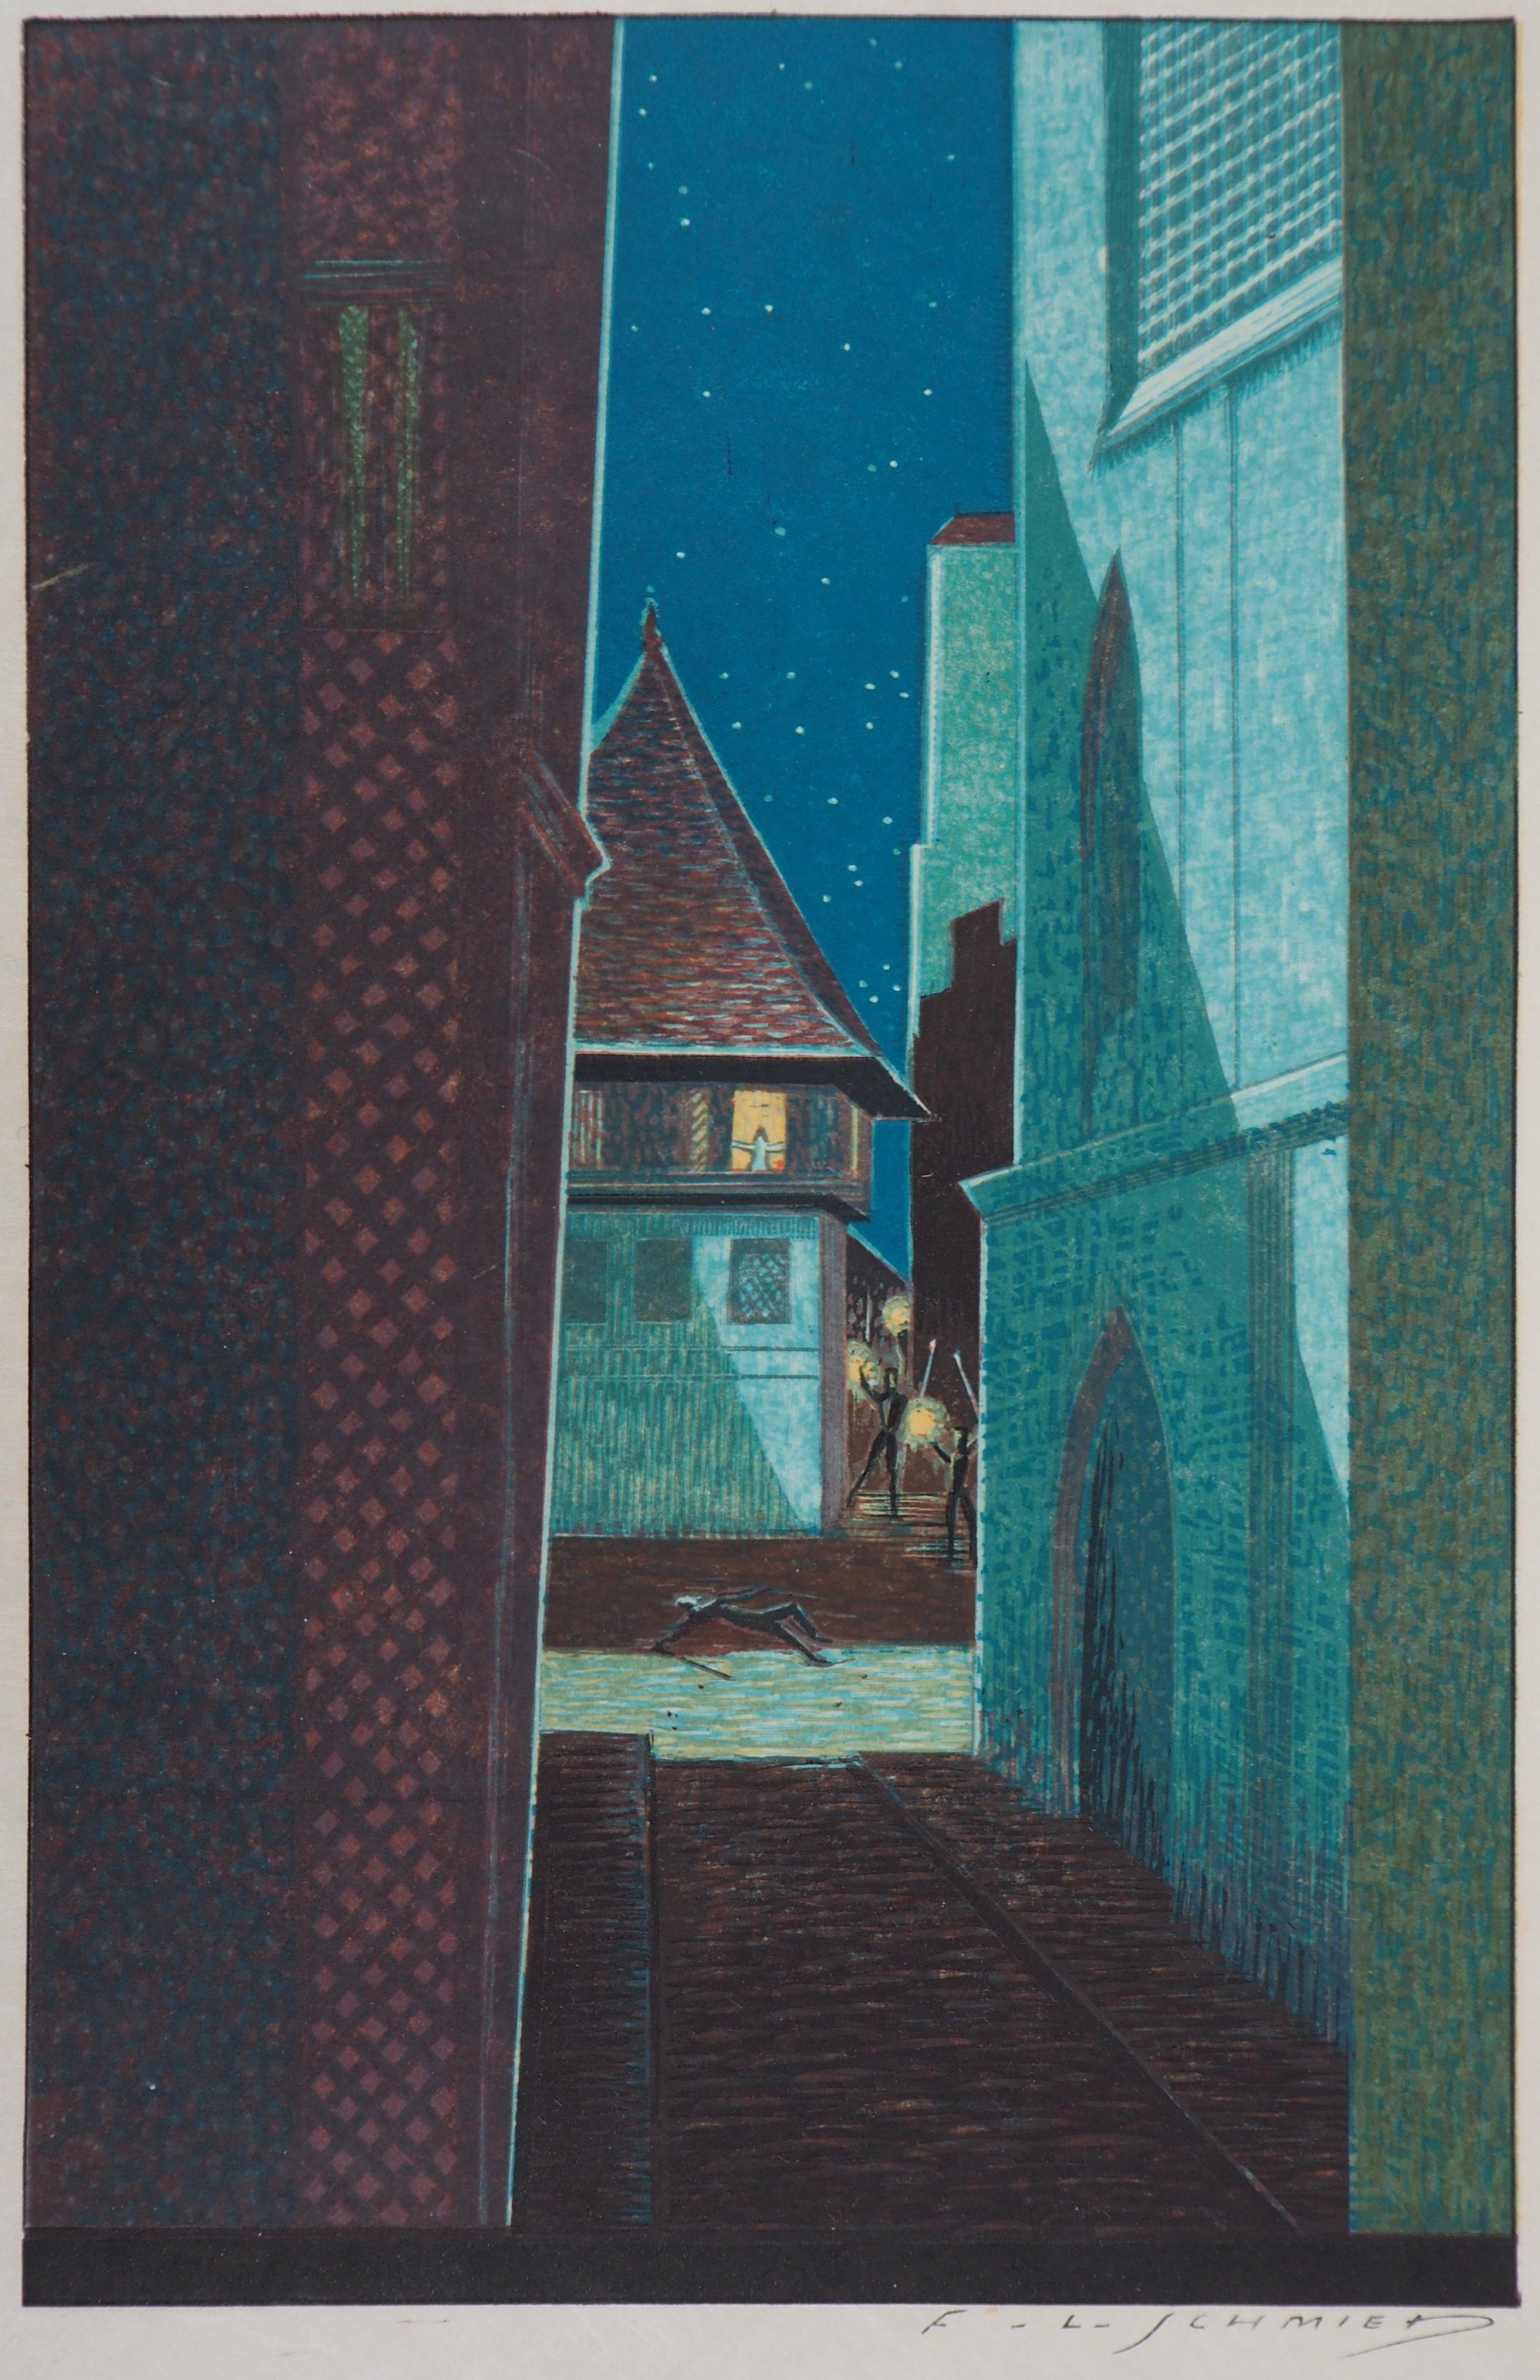 The Alley in the Night - Original Woodcut Print